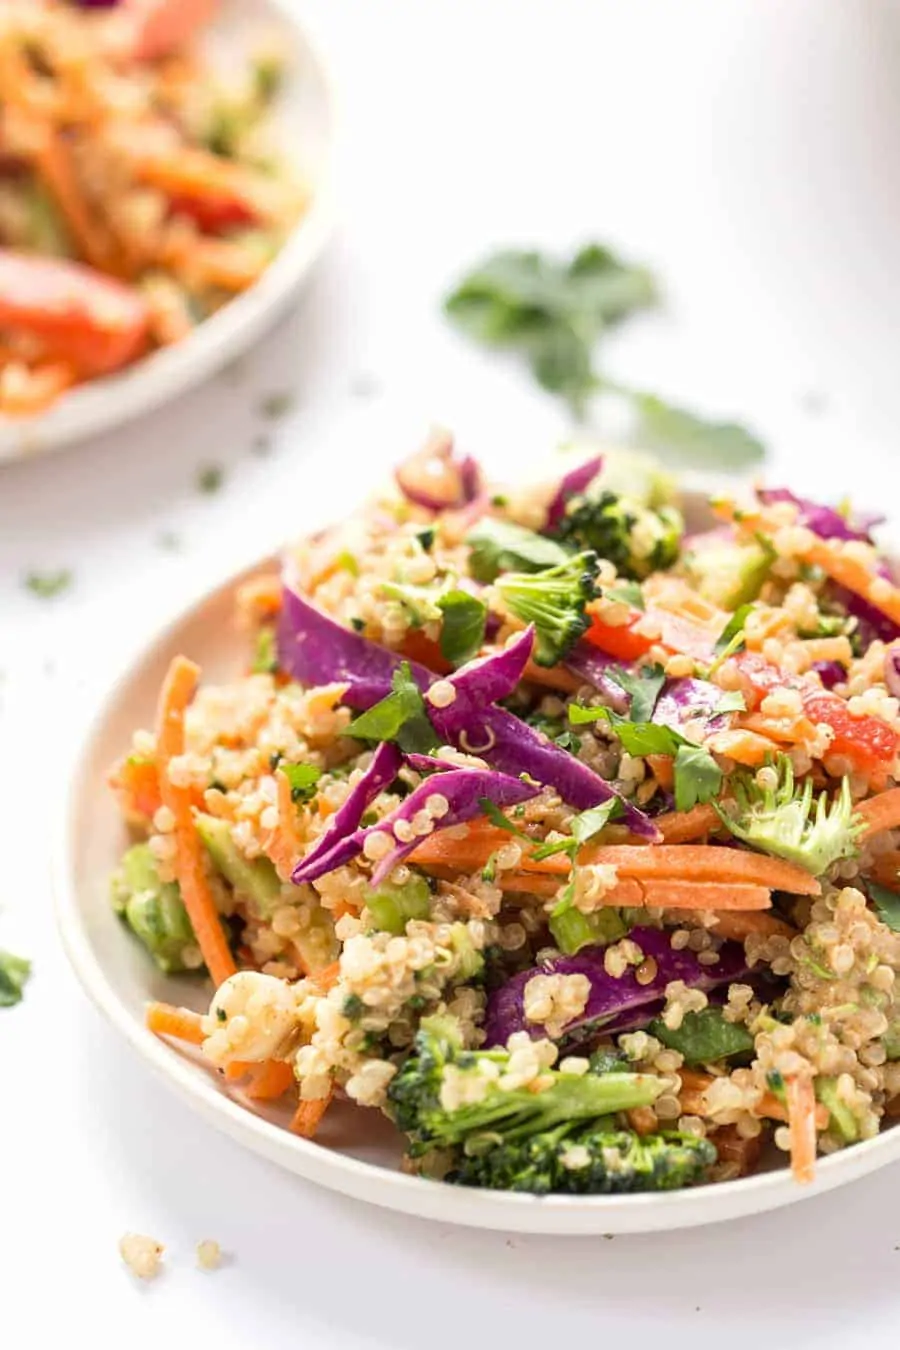 A super simple THAI QUINOA SALAD with all the veggies and a creamy almond butter dressing!